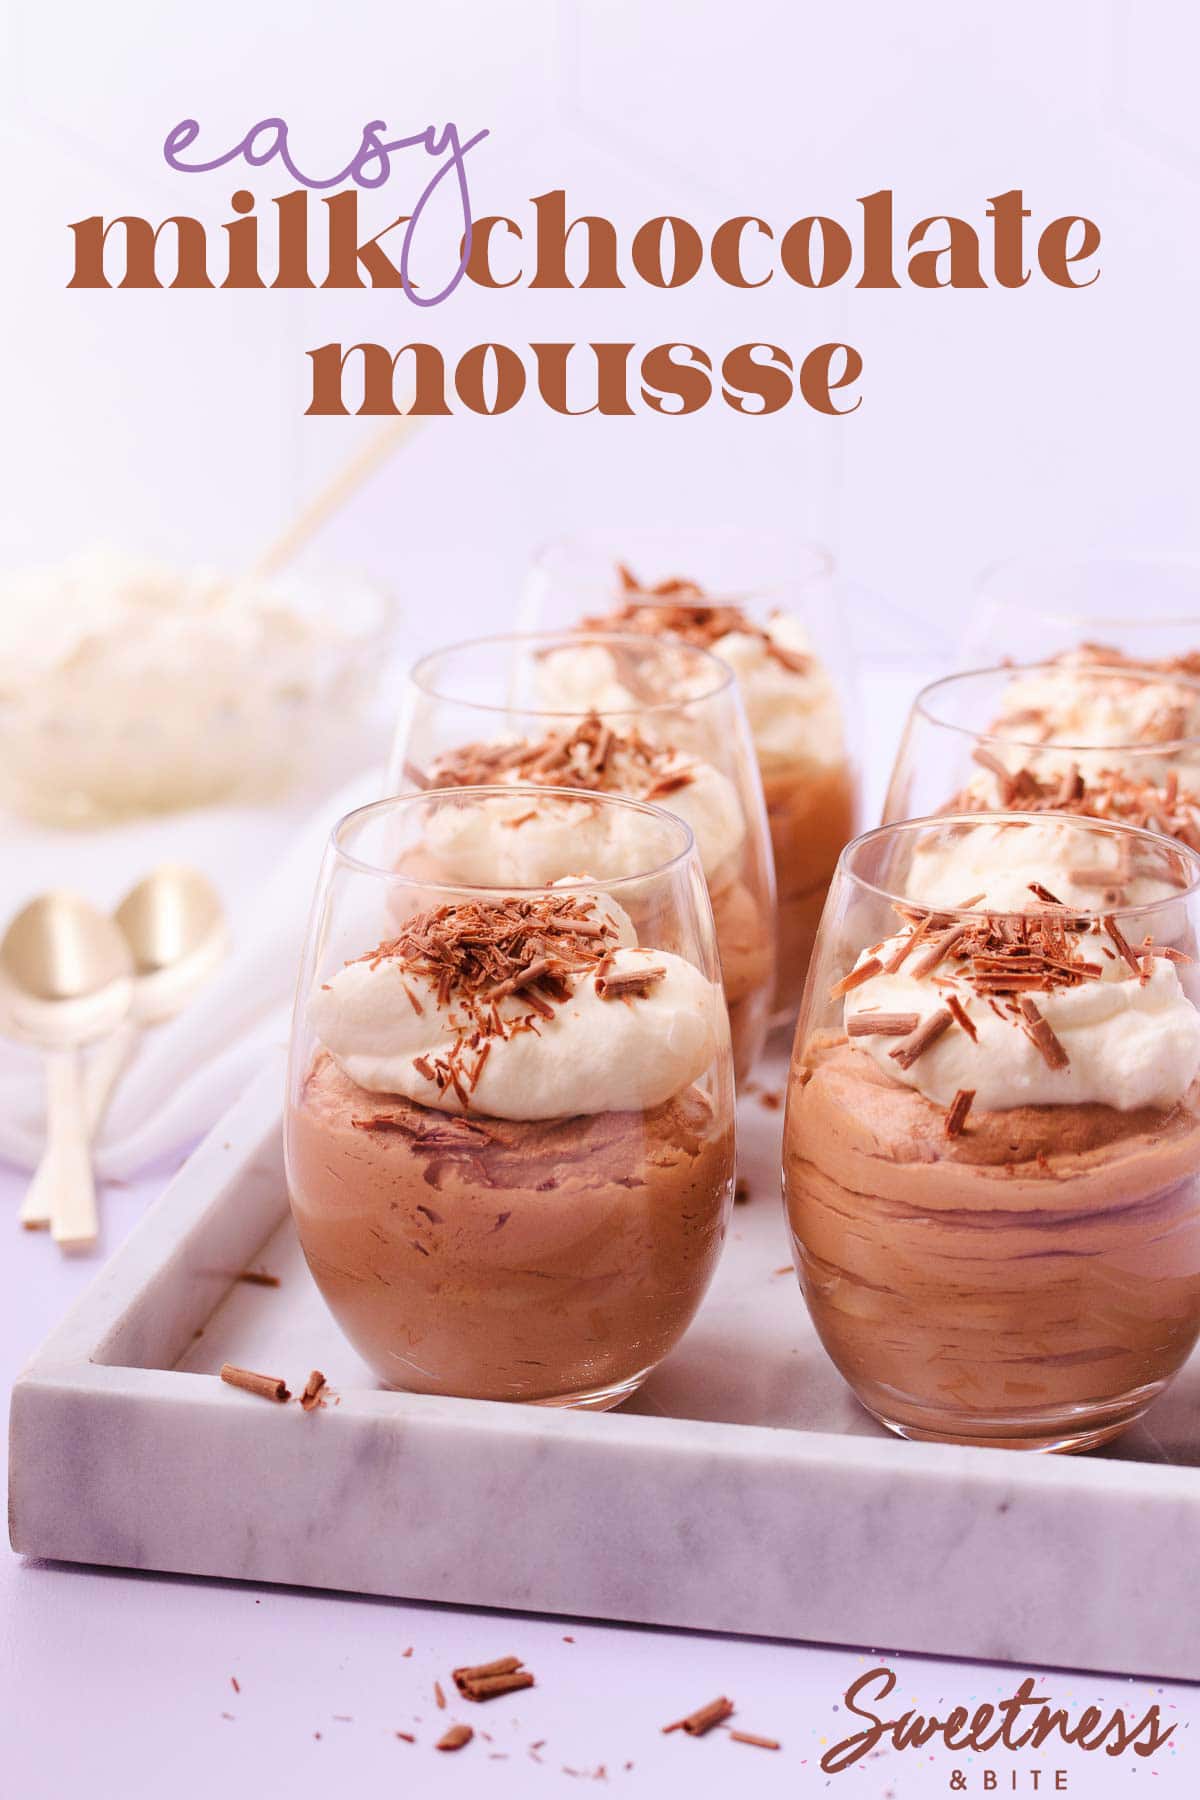 Six stemless wine glasses filled with milk chocolate mousse and topped with whipped cream and chocolate shavings, on a marble tray, with gold teaspoons and a glass bowl of whipped cream.